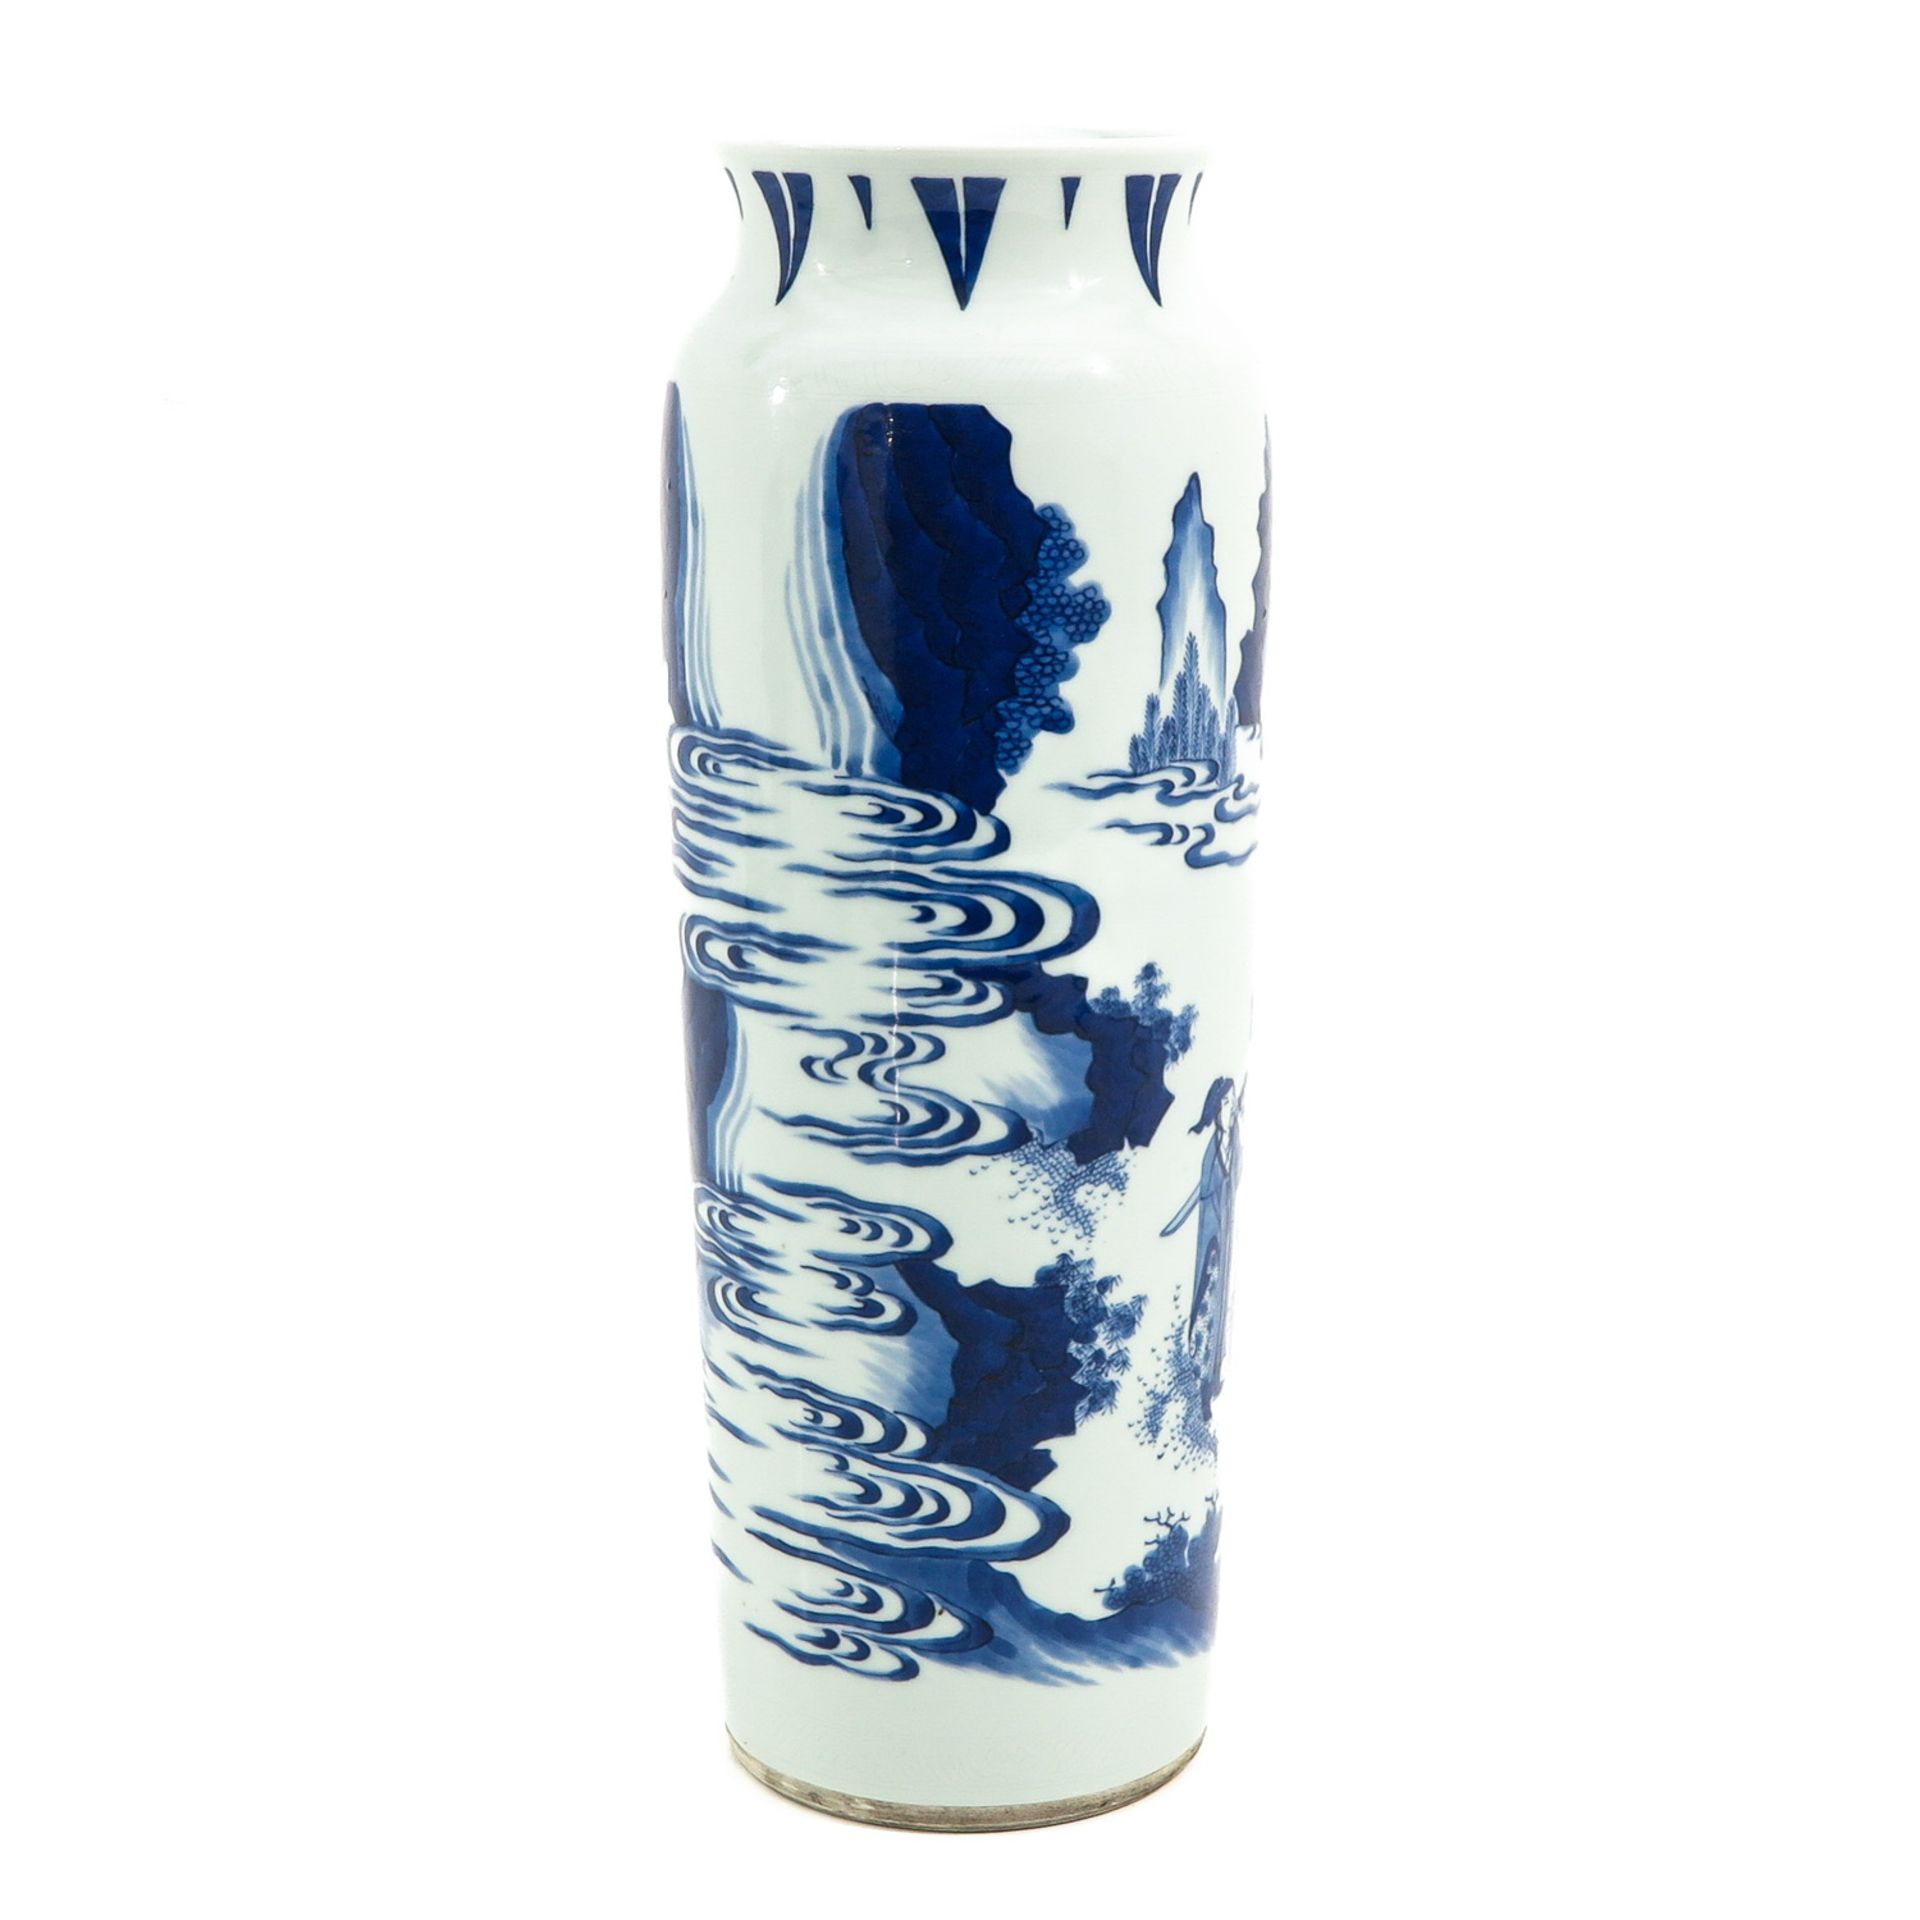 A Blue and White Roll Wagon Vase - Image 3 of 9